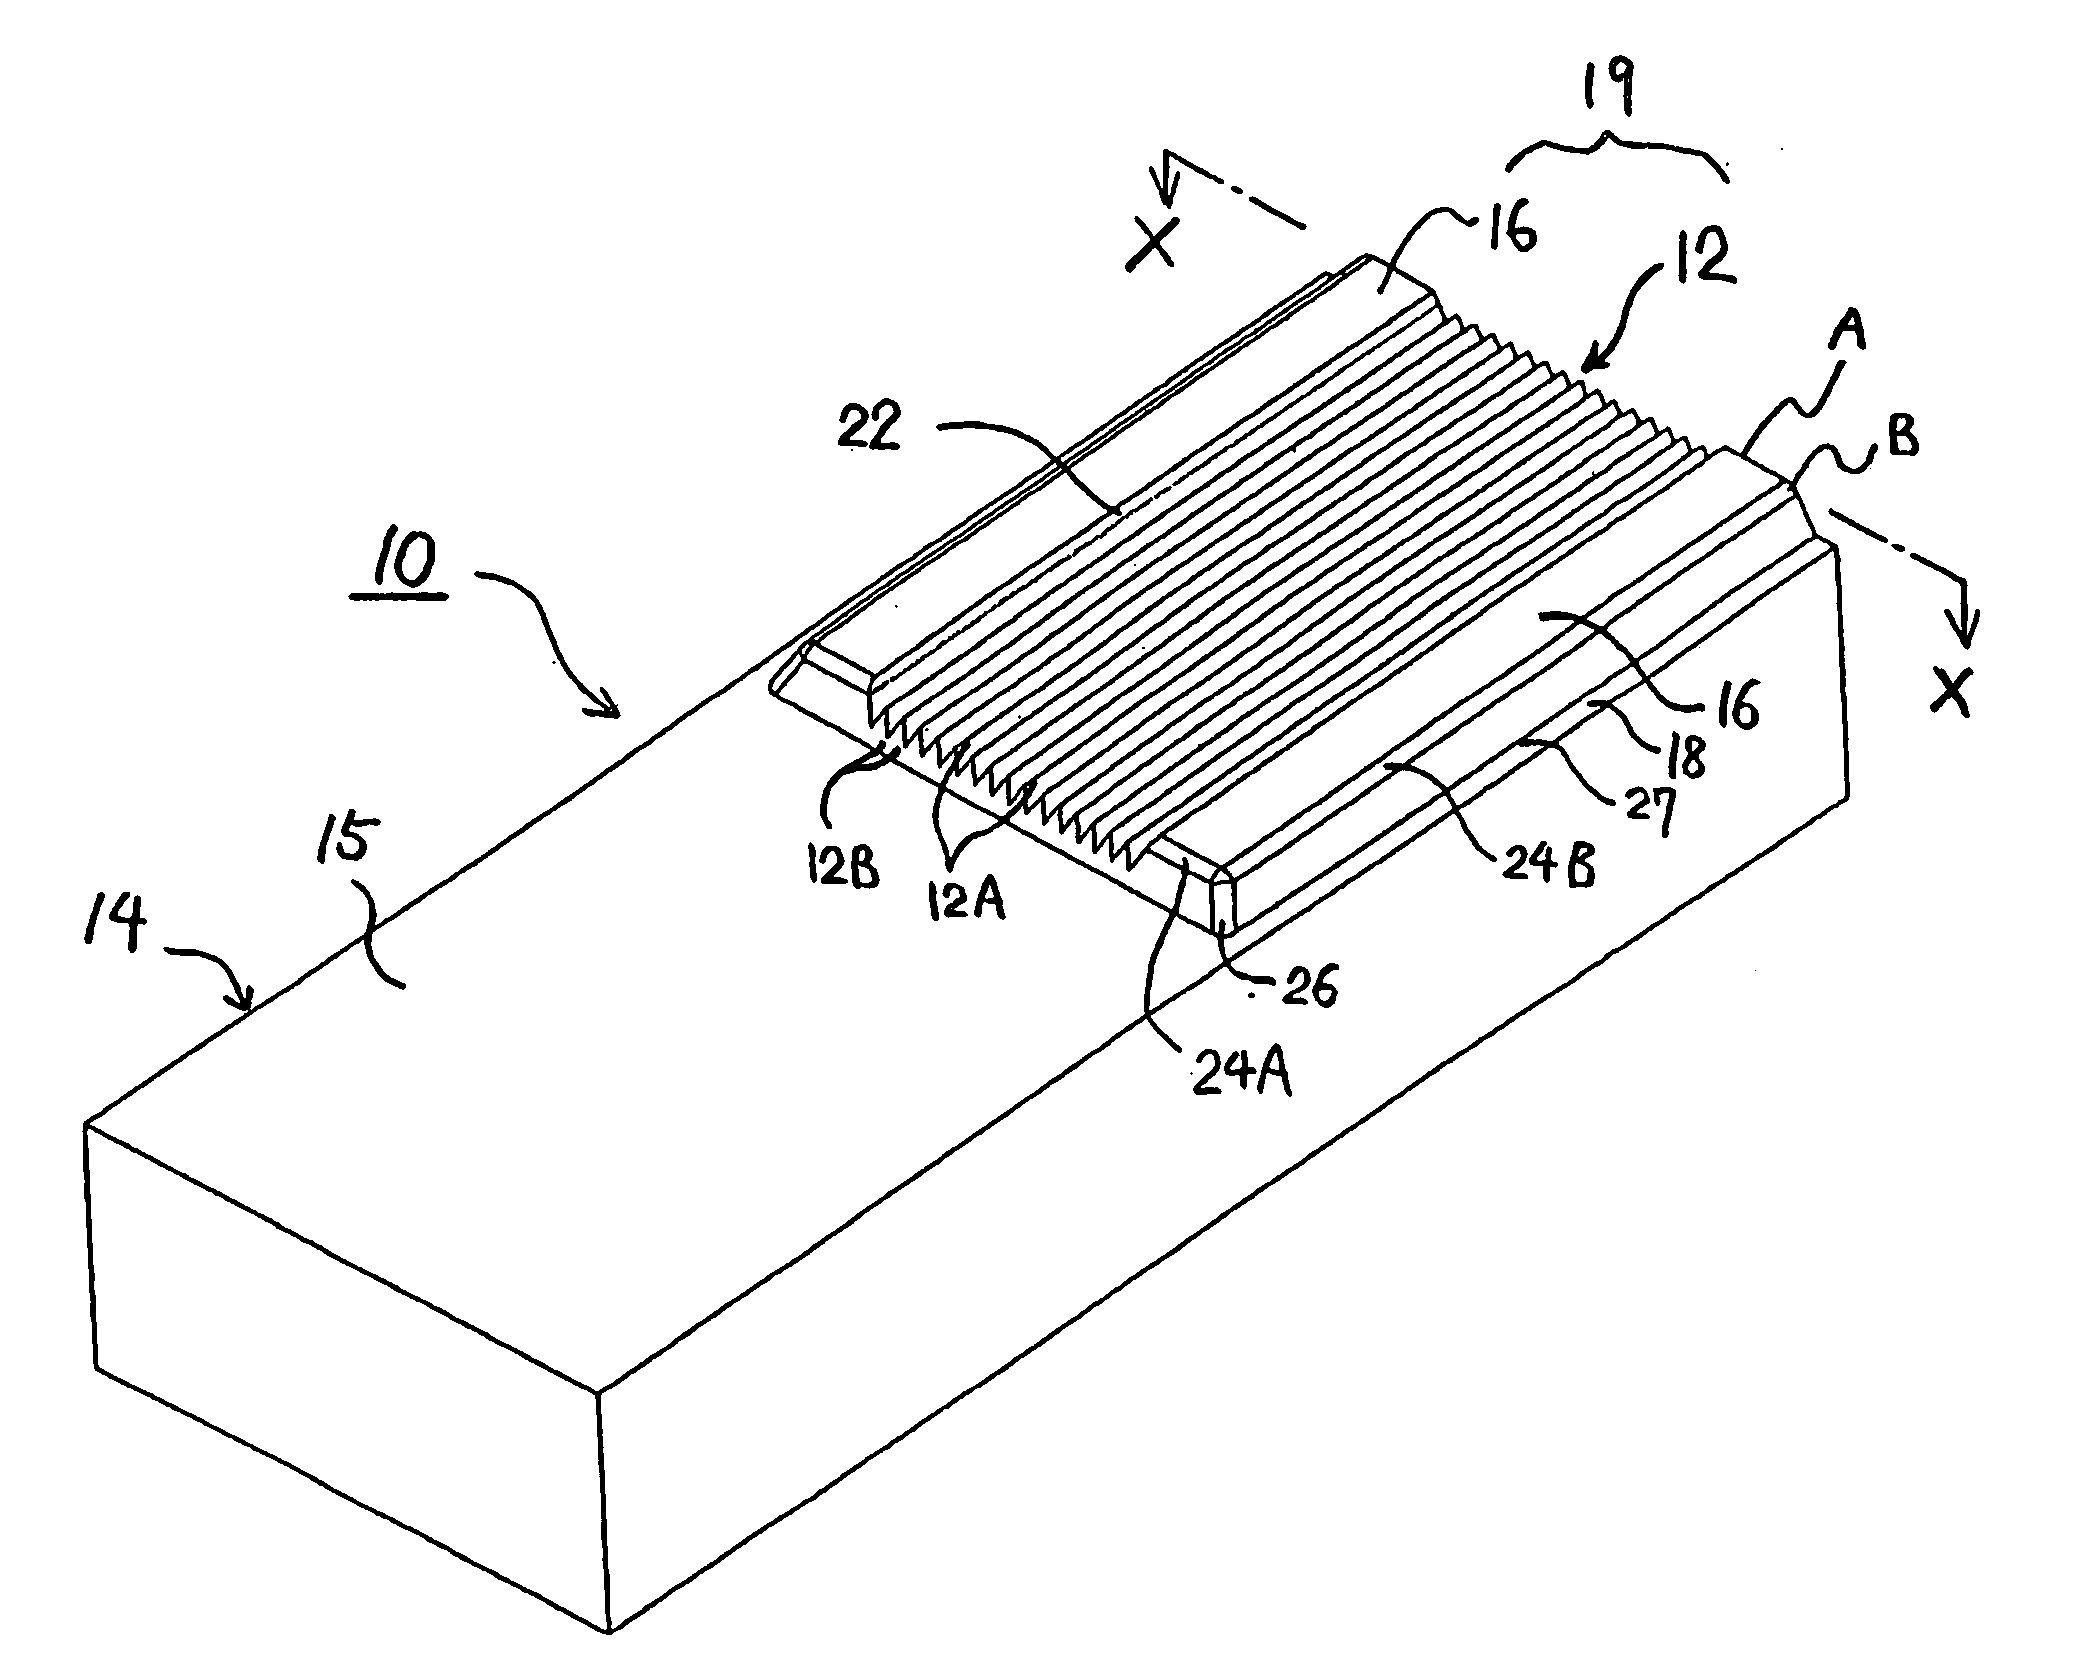 Glass substrate having a grooved portion, method for fabricating the same, and press mold for fabricating the glass substrate